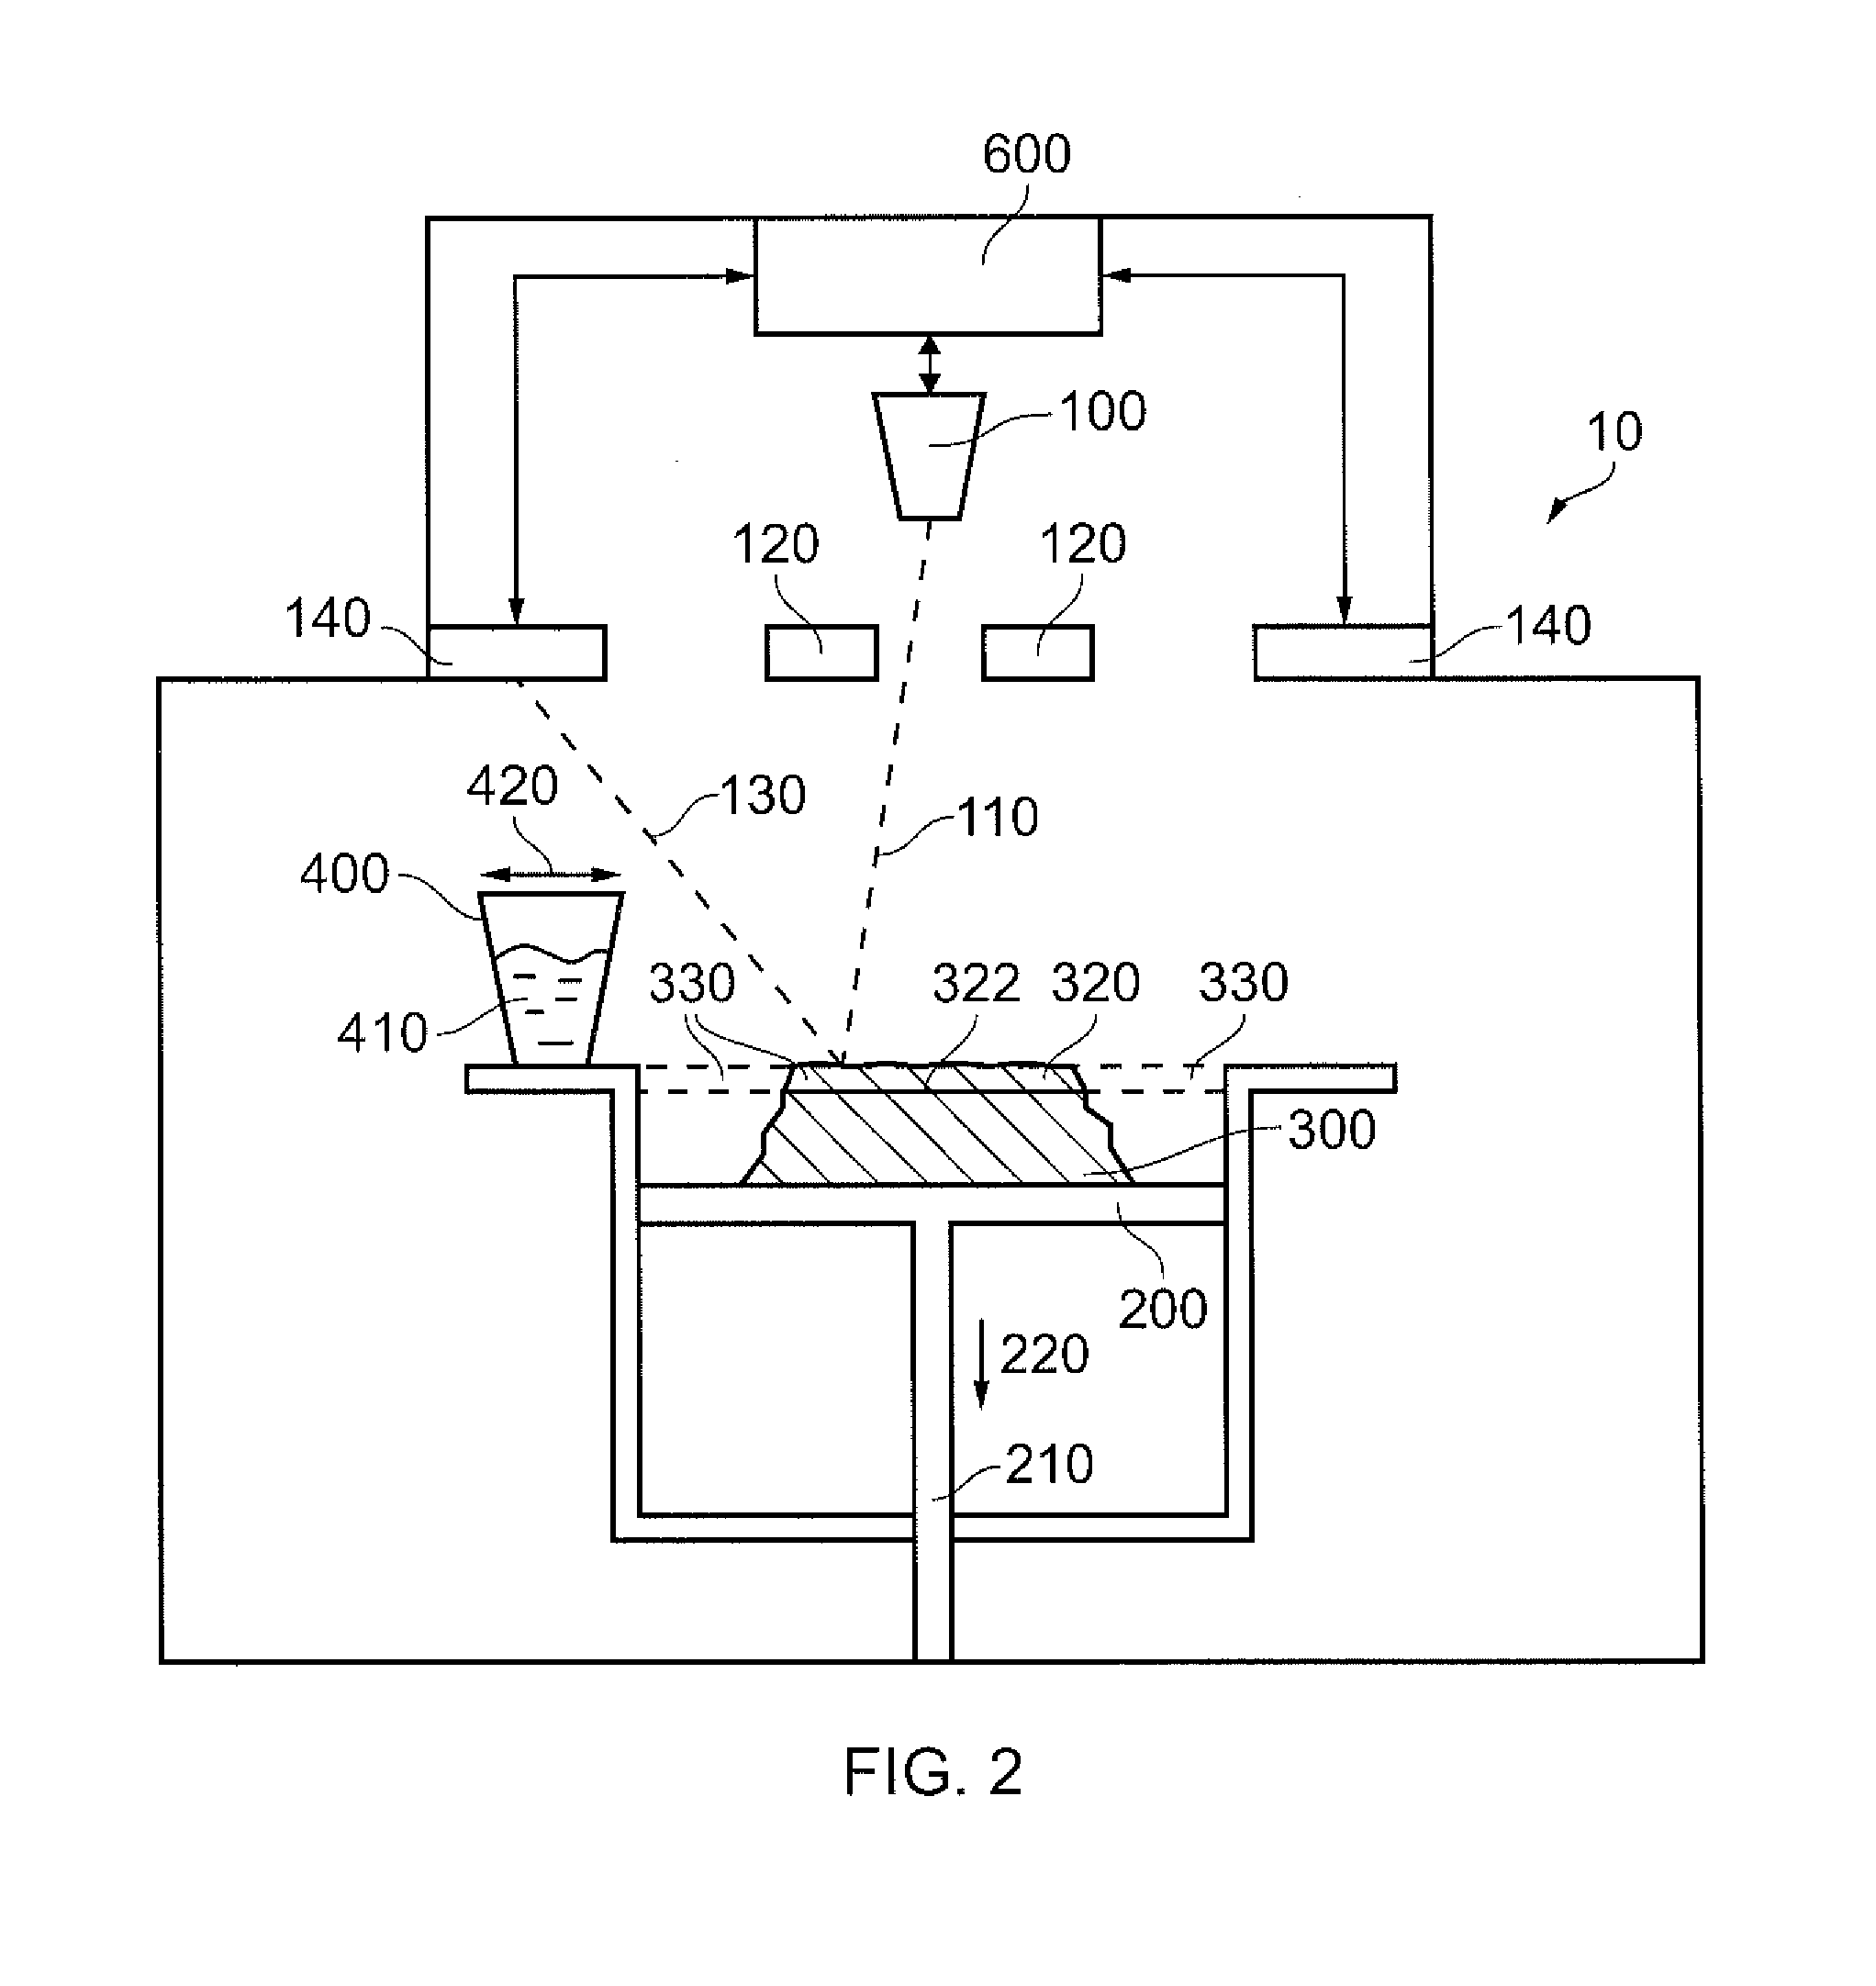 Method of manufacturing a component